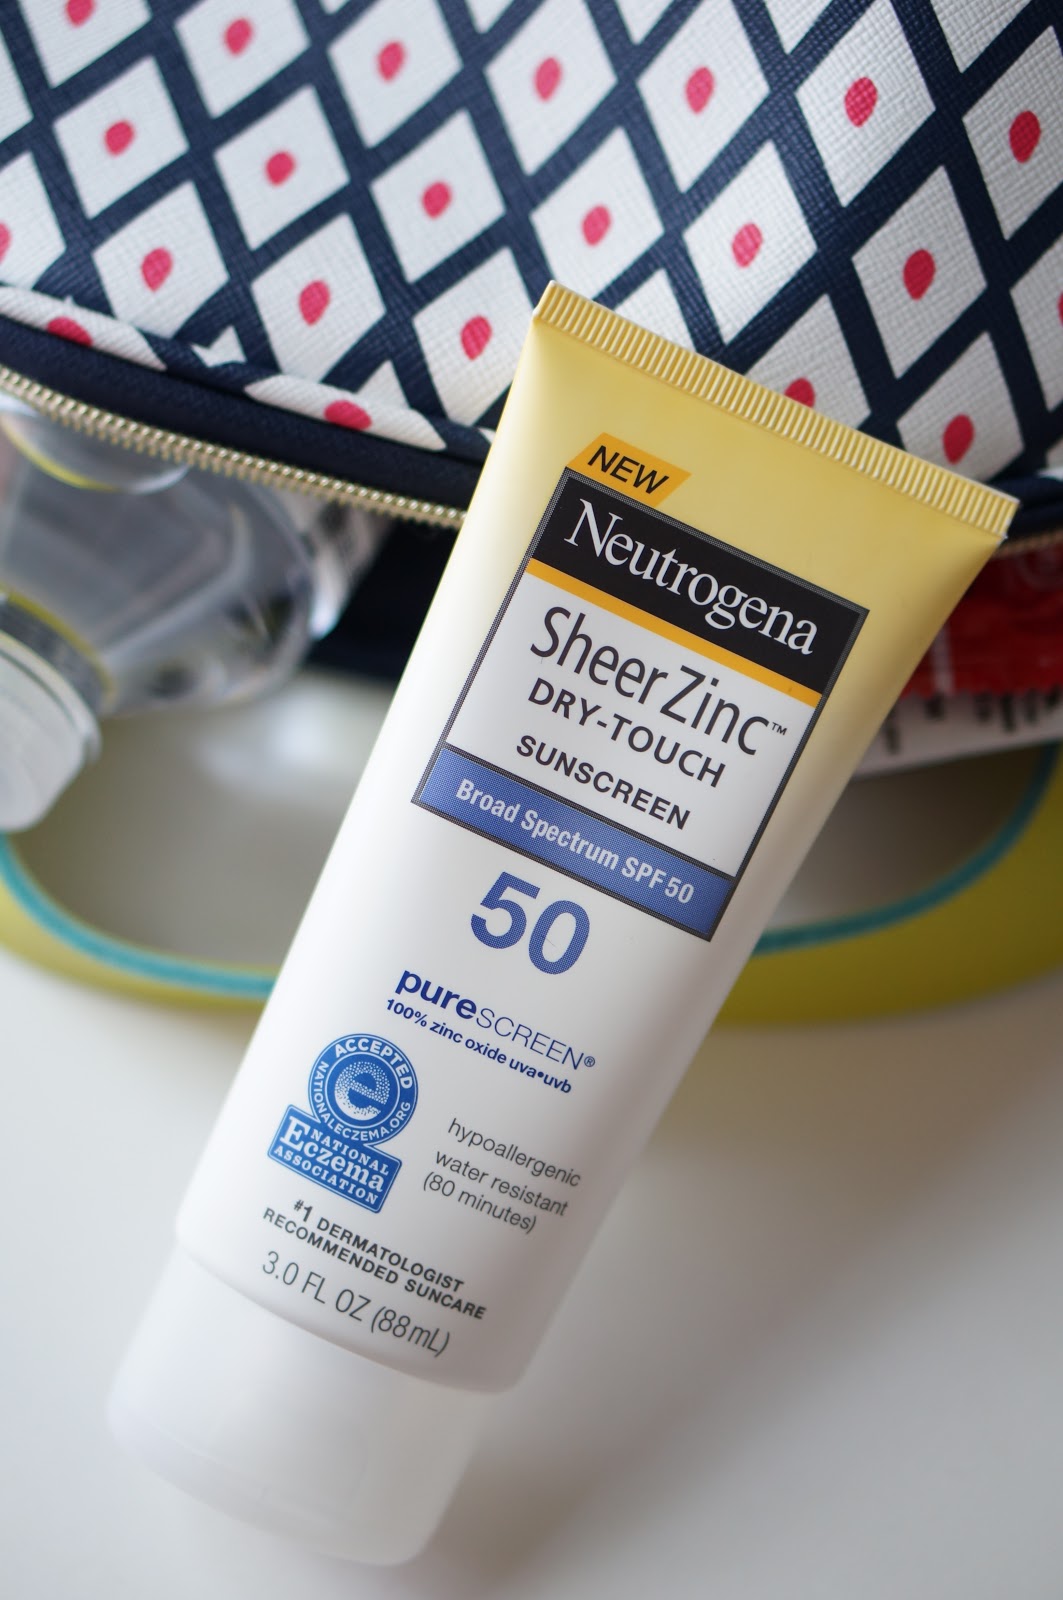 Rebecca Lately What's In My Bag Summer Neutrogena Sheer Zinc Lotion #CollectiveBias #ChooseSkinHealth #SummerSkinReady